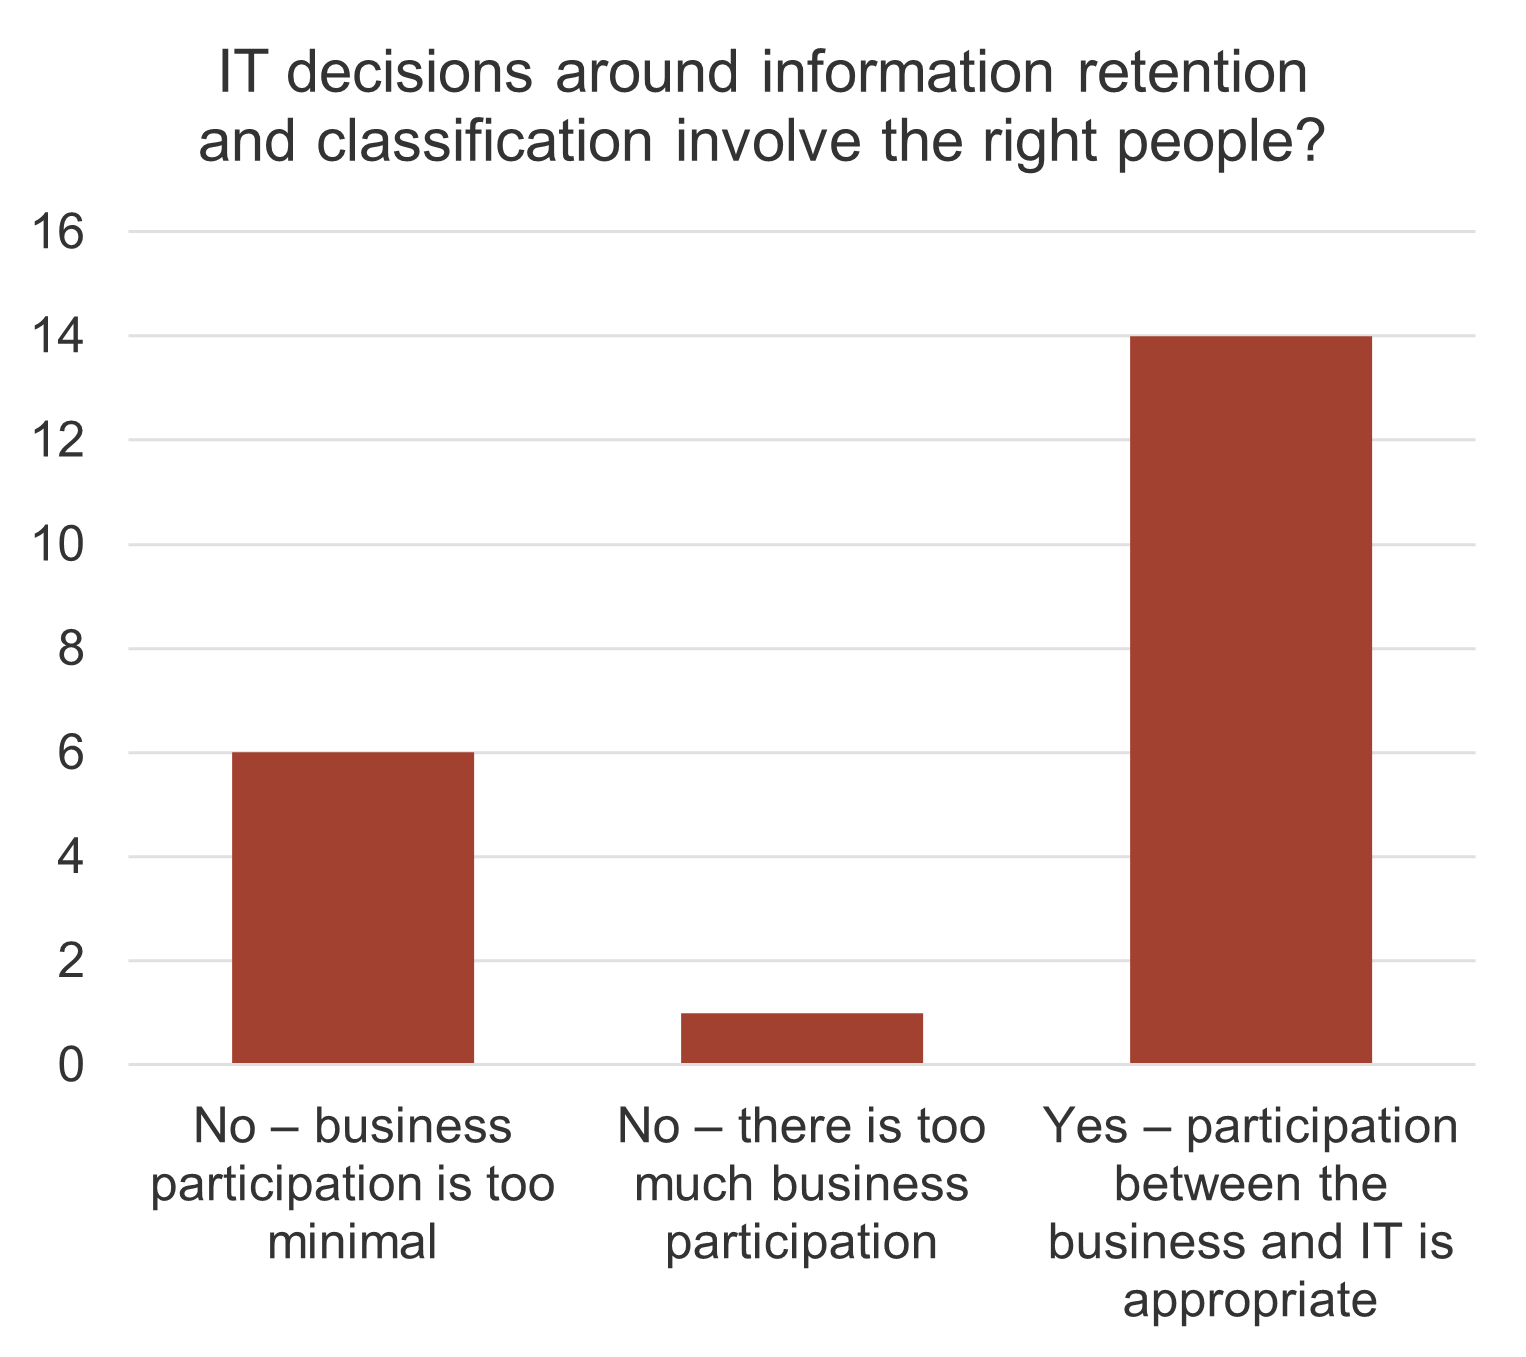 A bar graph is depicted. The title is: IT decisions around information retention and classification involve the right people?